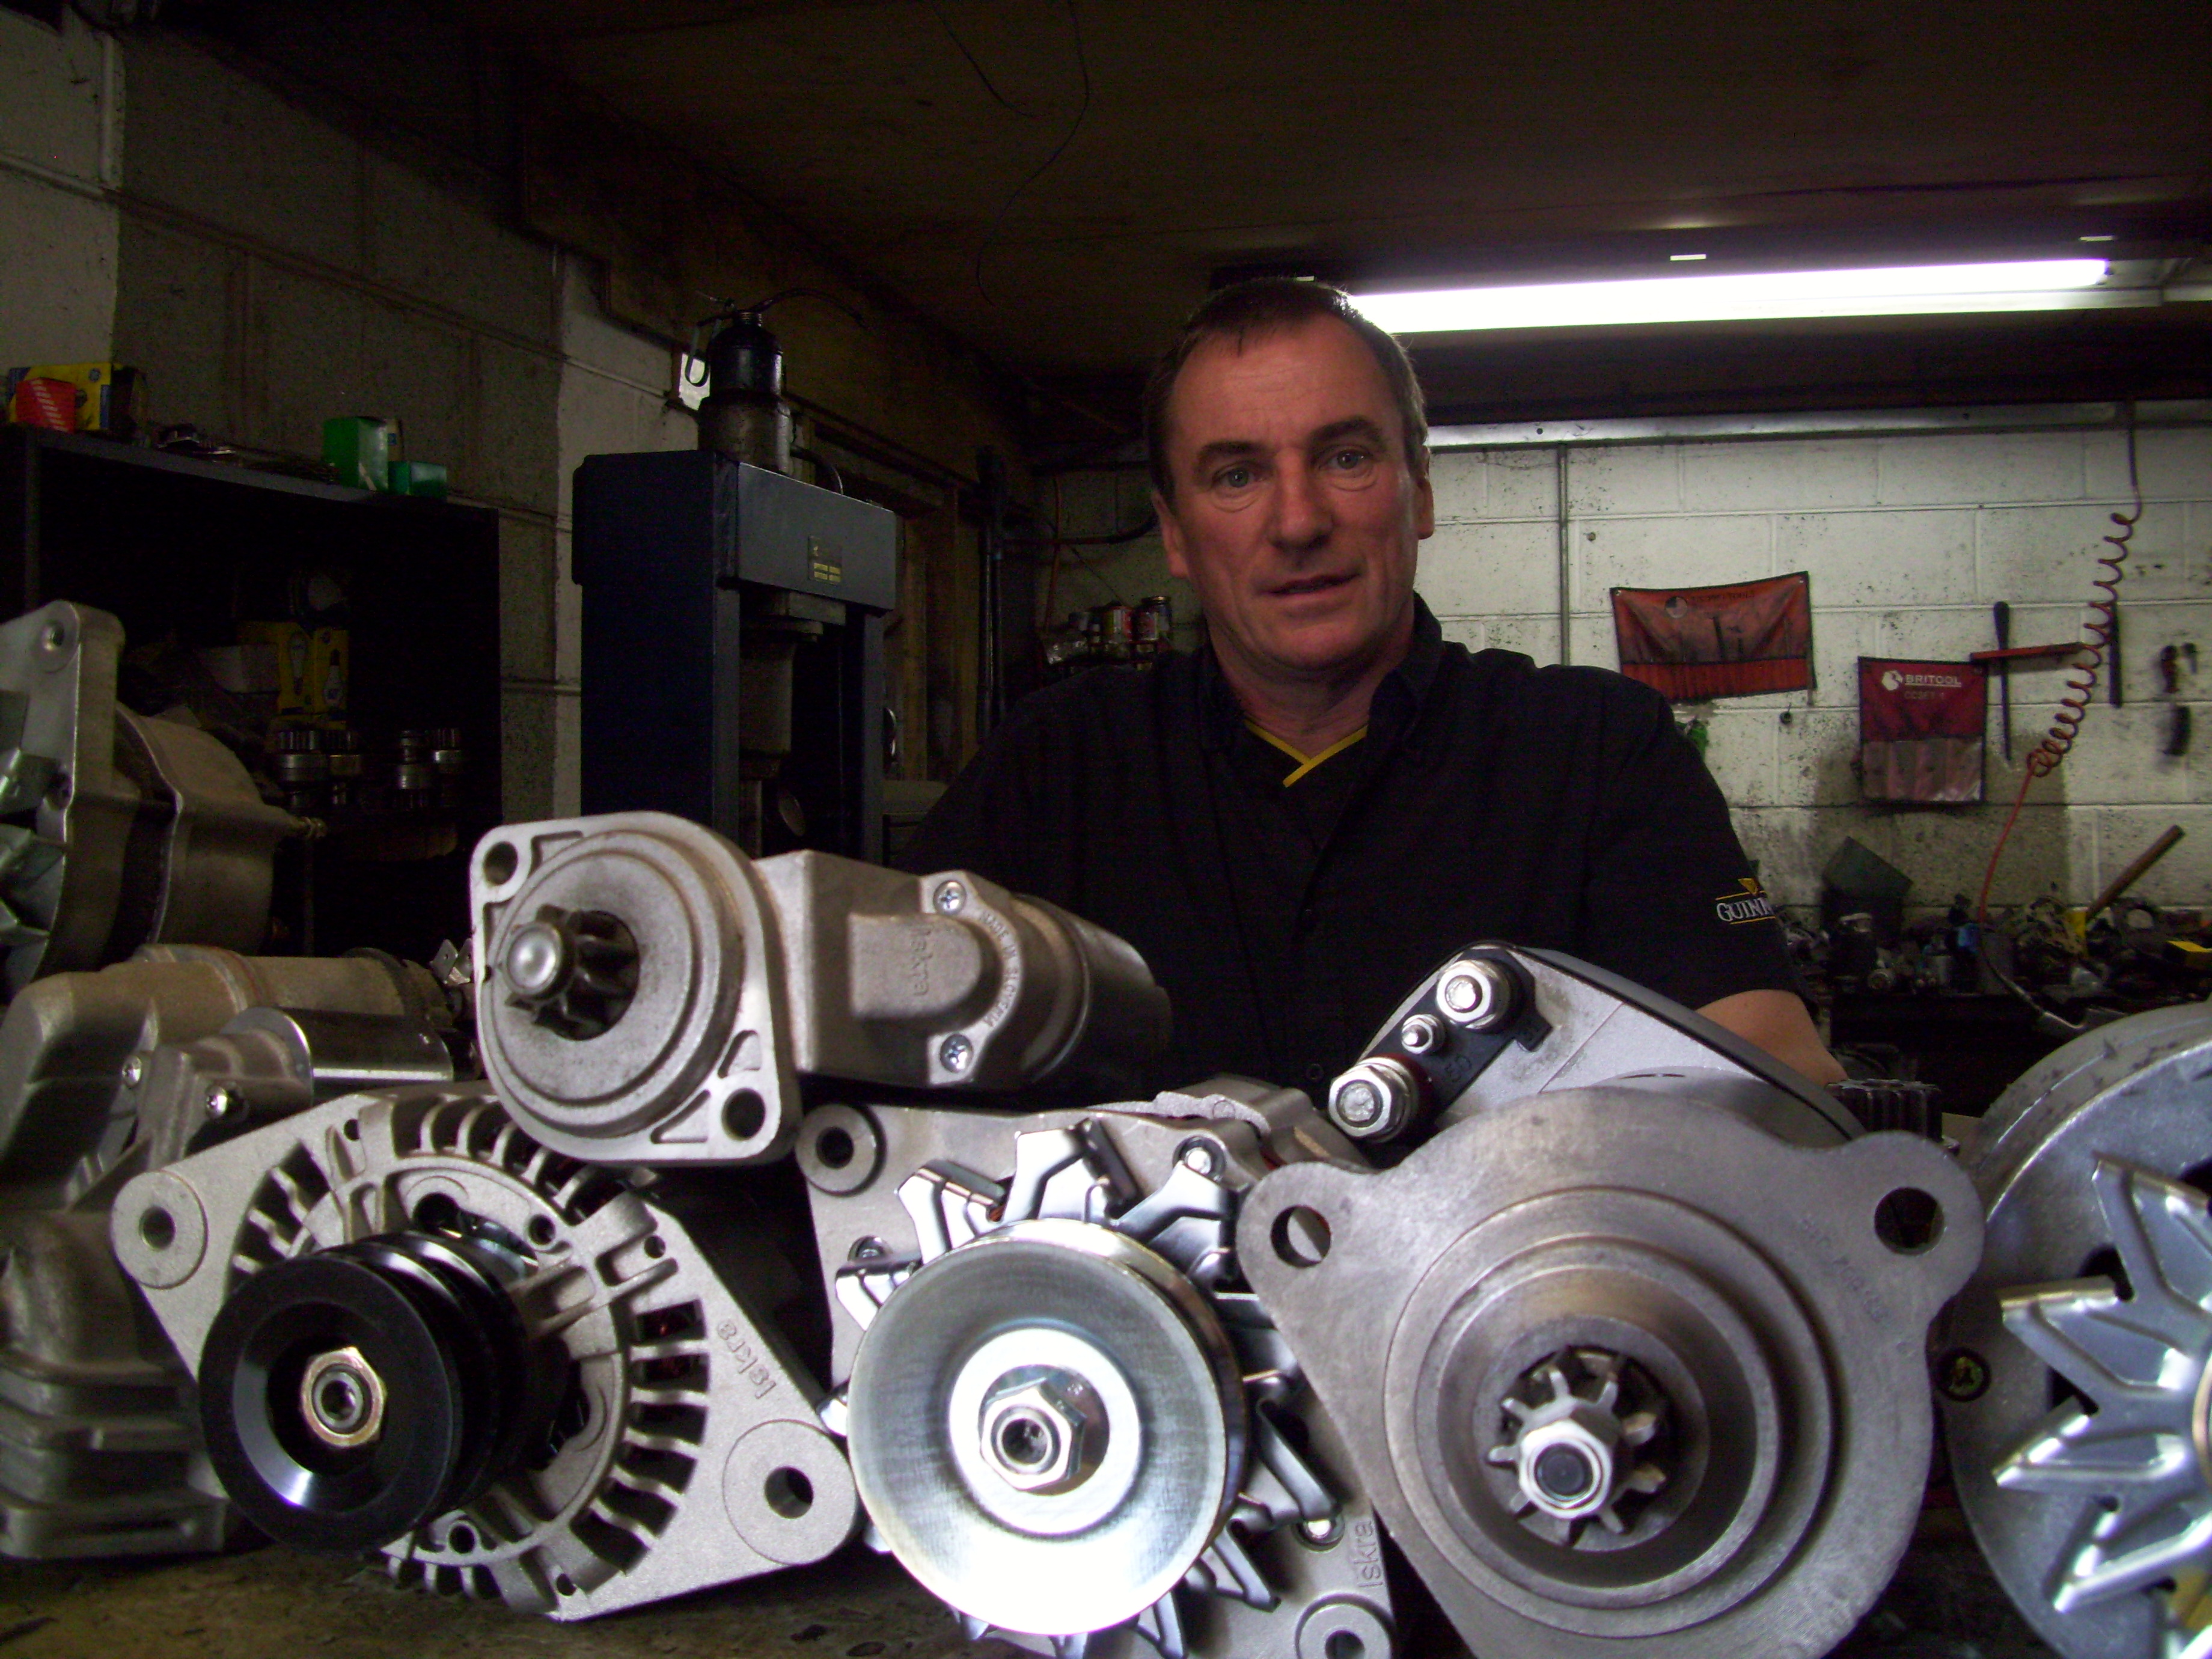 Lalor Auto Electrics - Wexford - Repairs to Starters, Alternators and Car Electrics